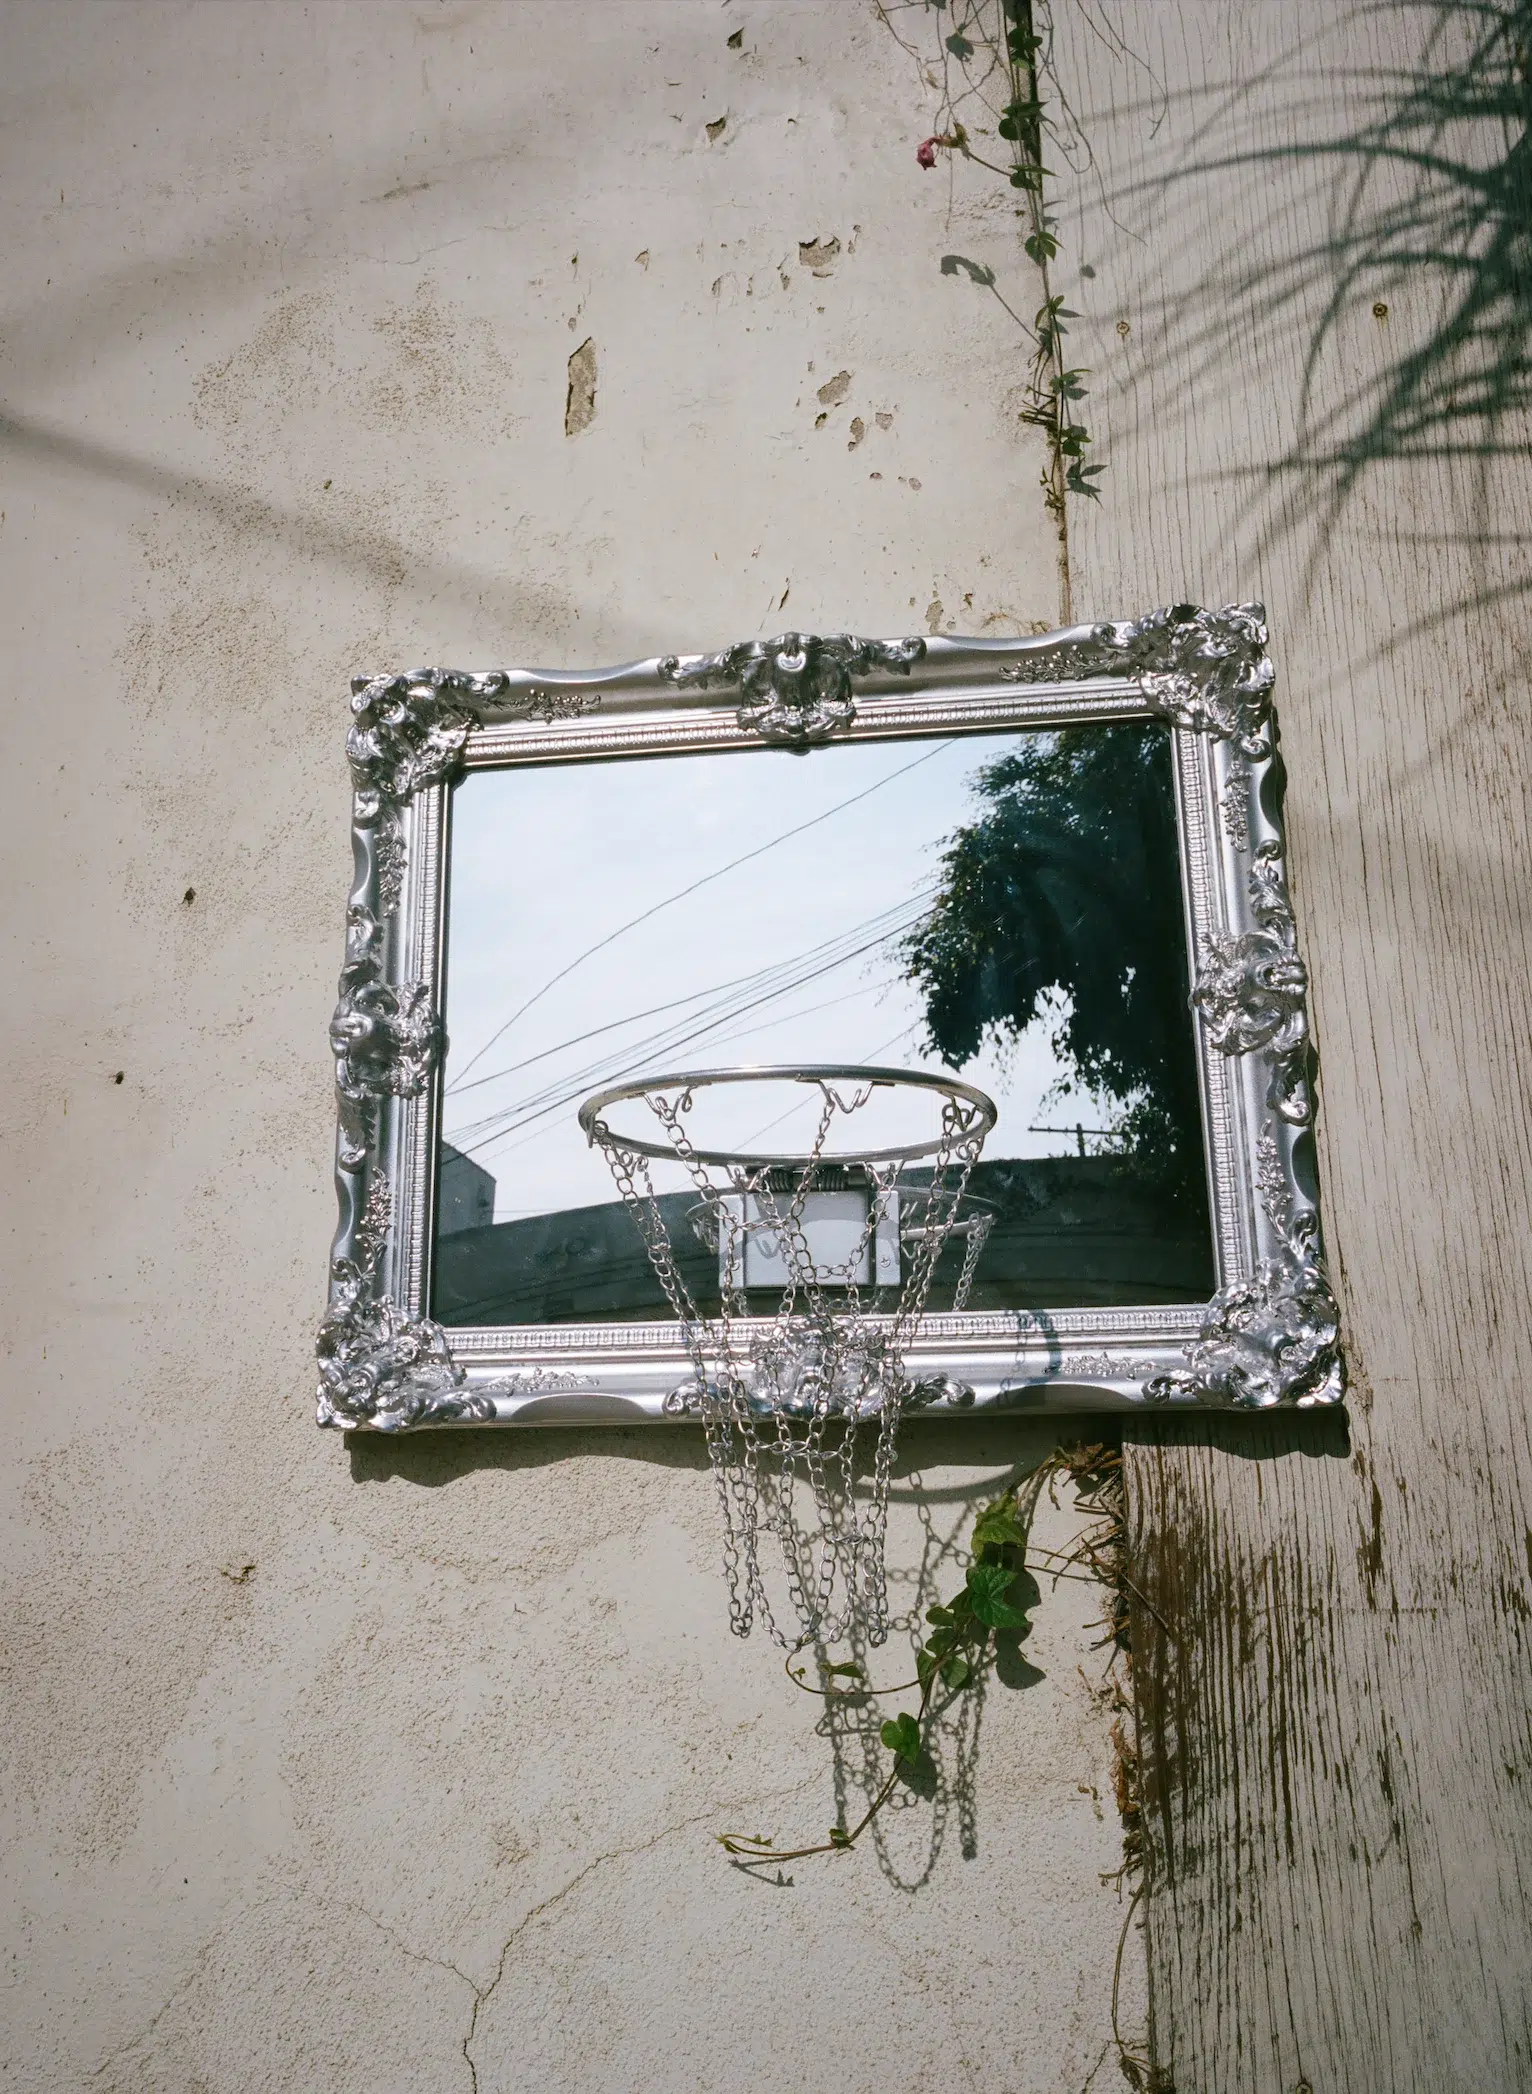 A basketball hoop is reflected in a mirror on a wall.